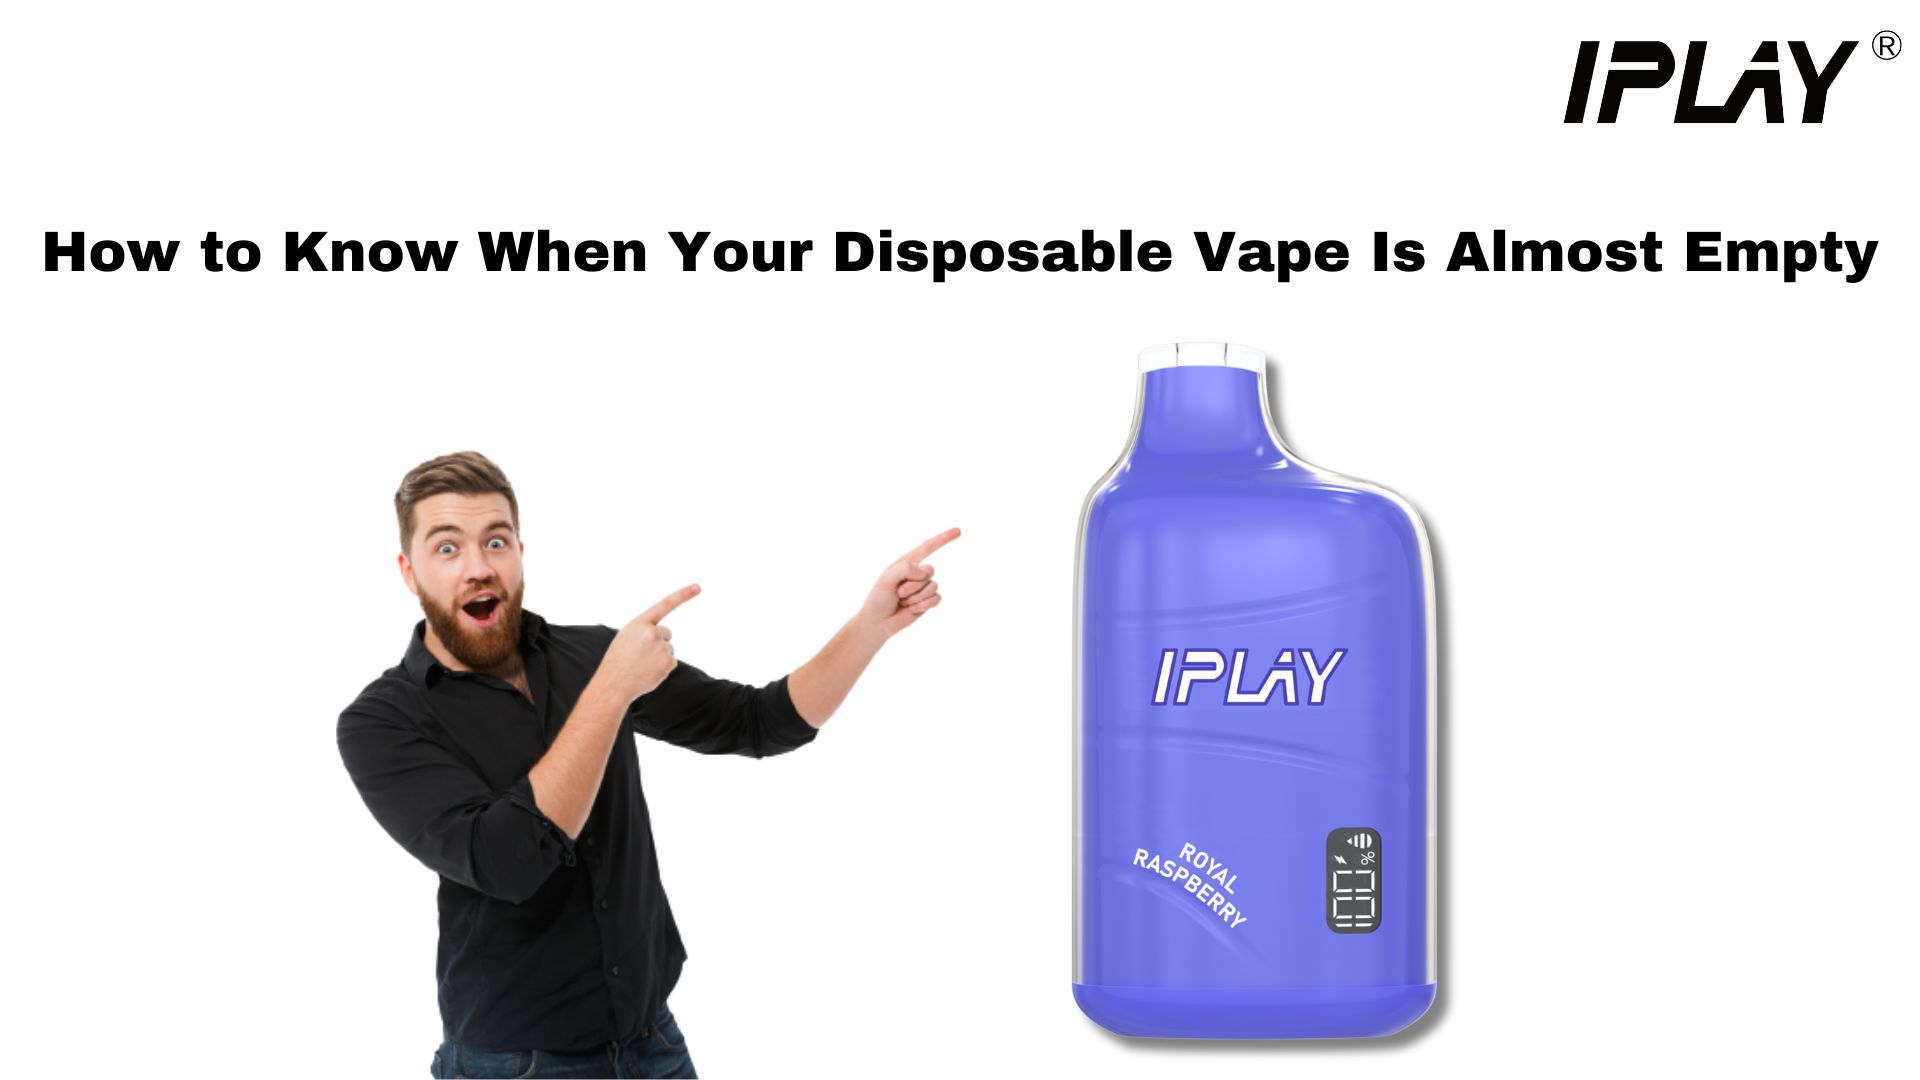 How to Know When Your Disposable Vape Is Almost Empty